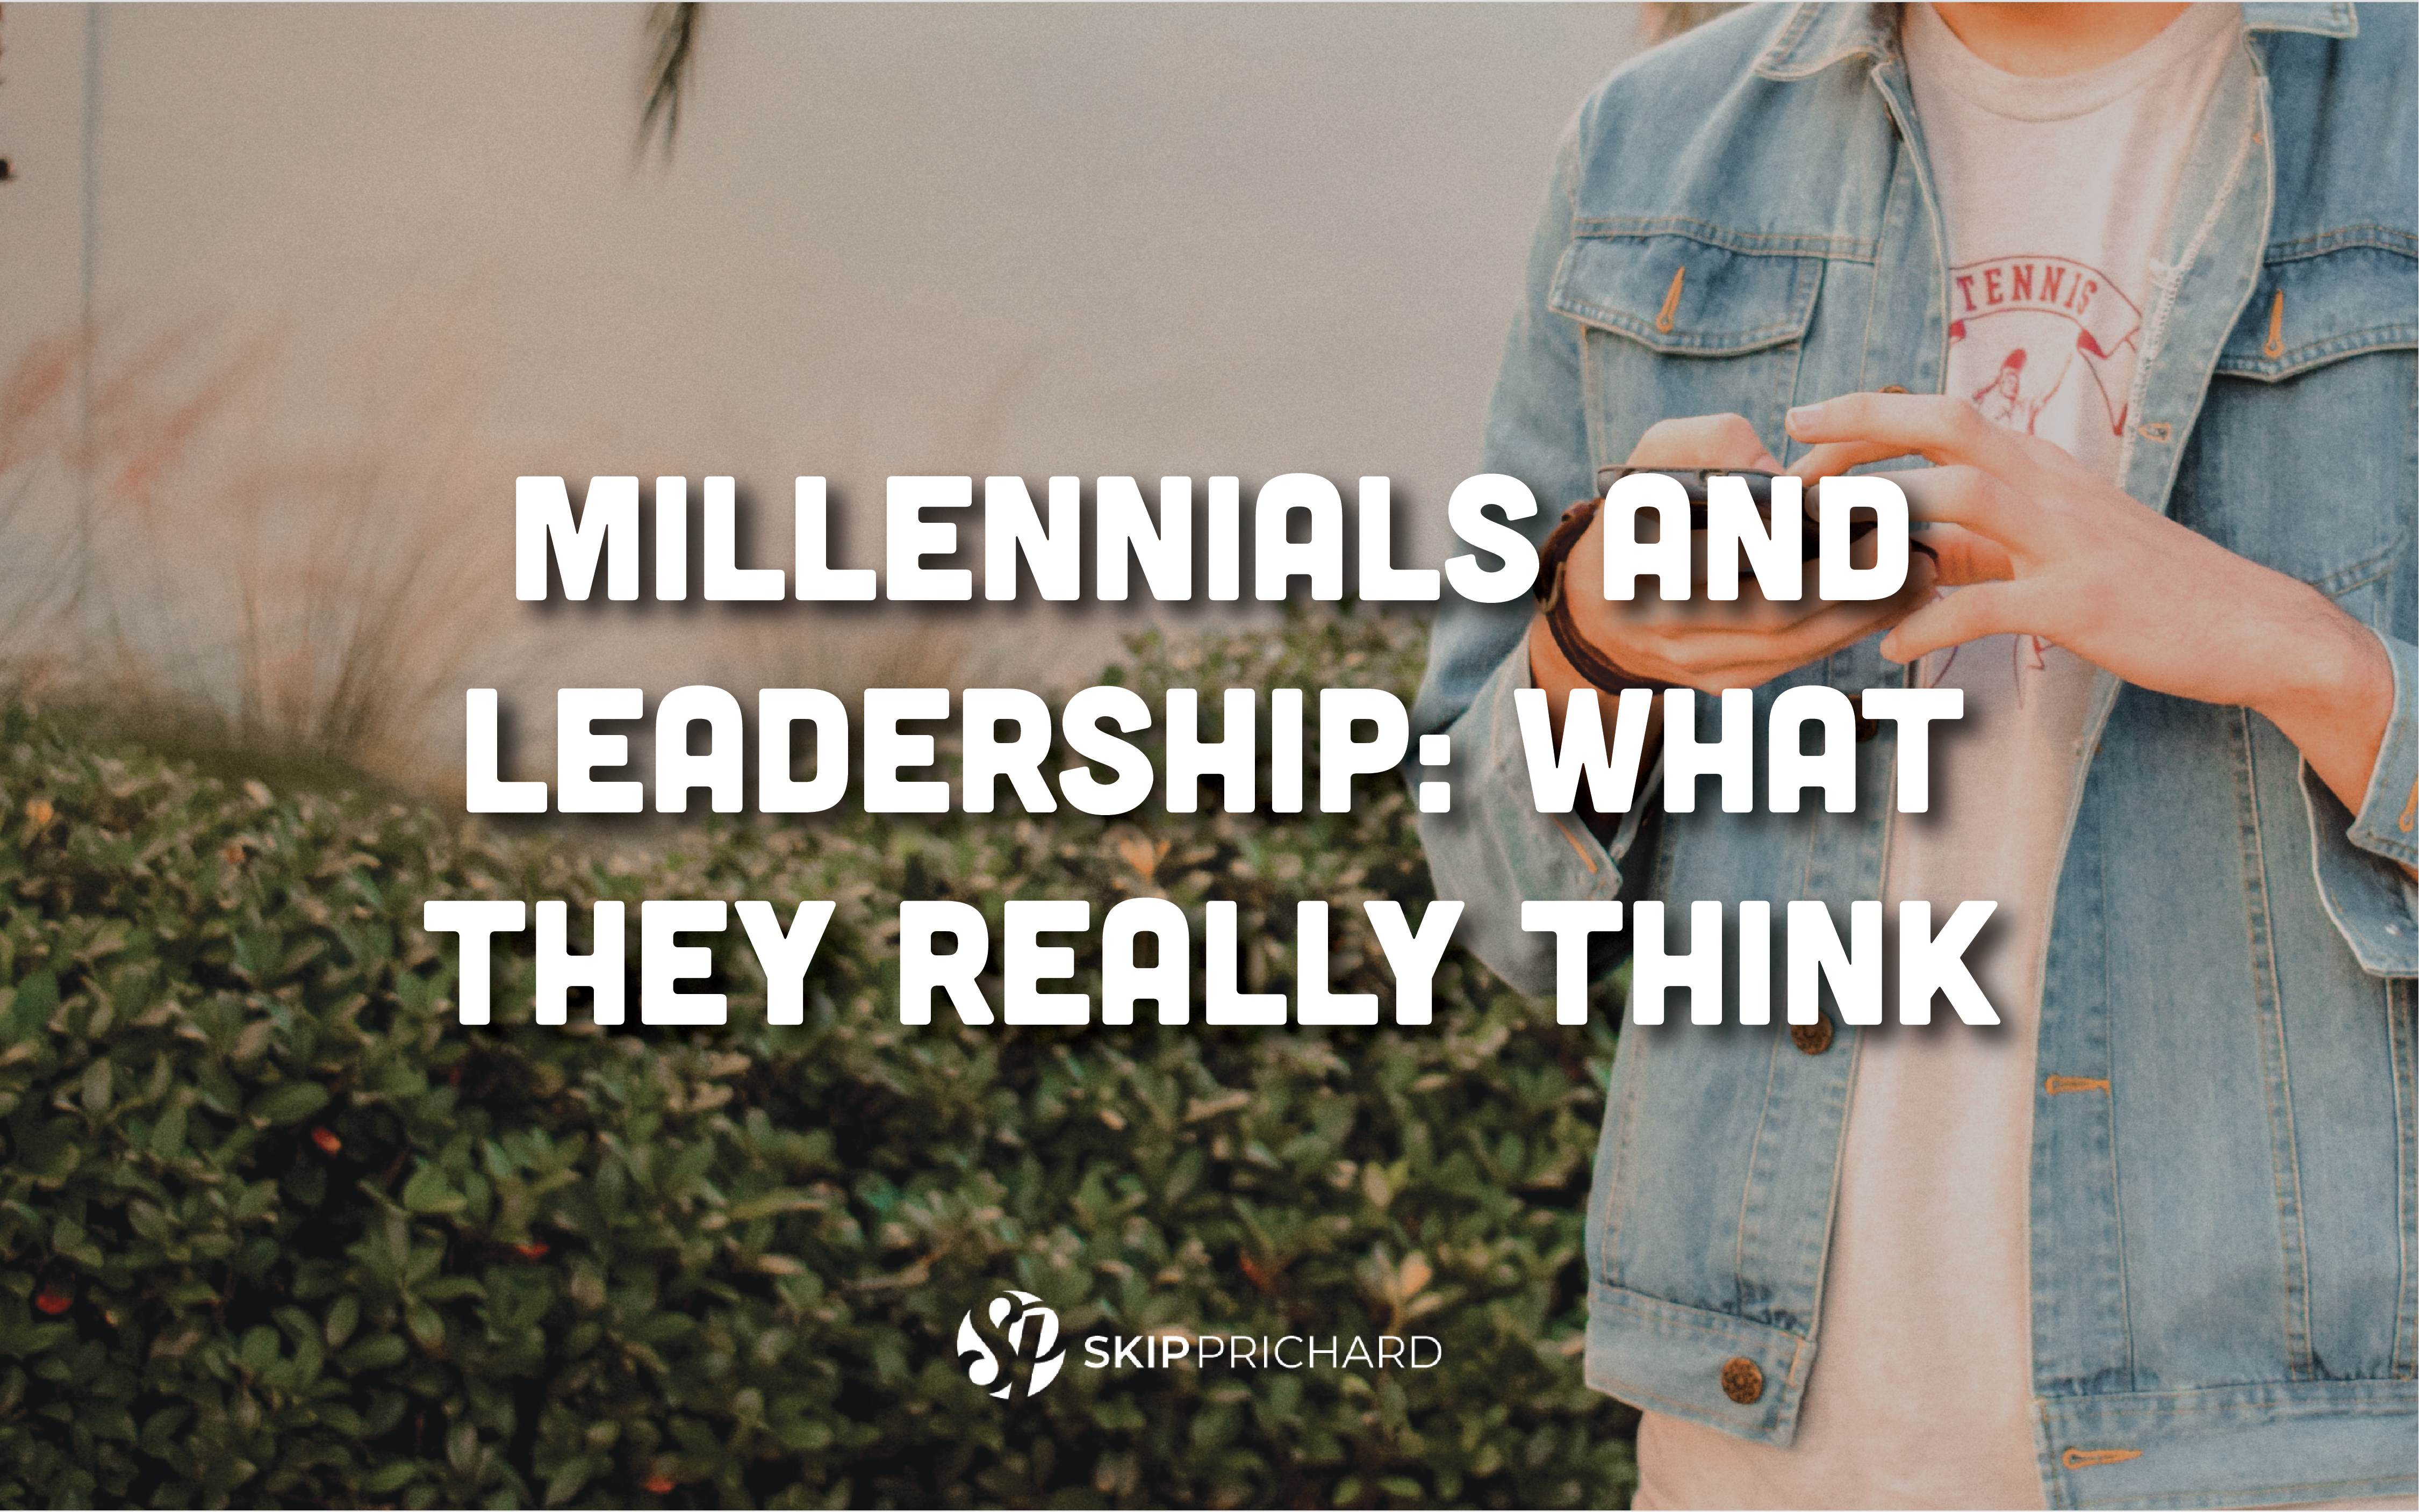 Millennials and Leadership: What They Really Think